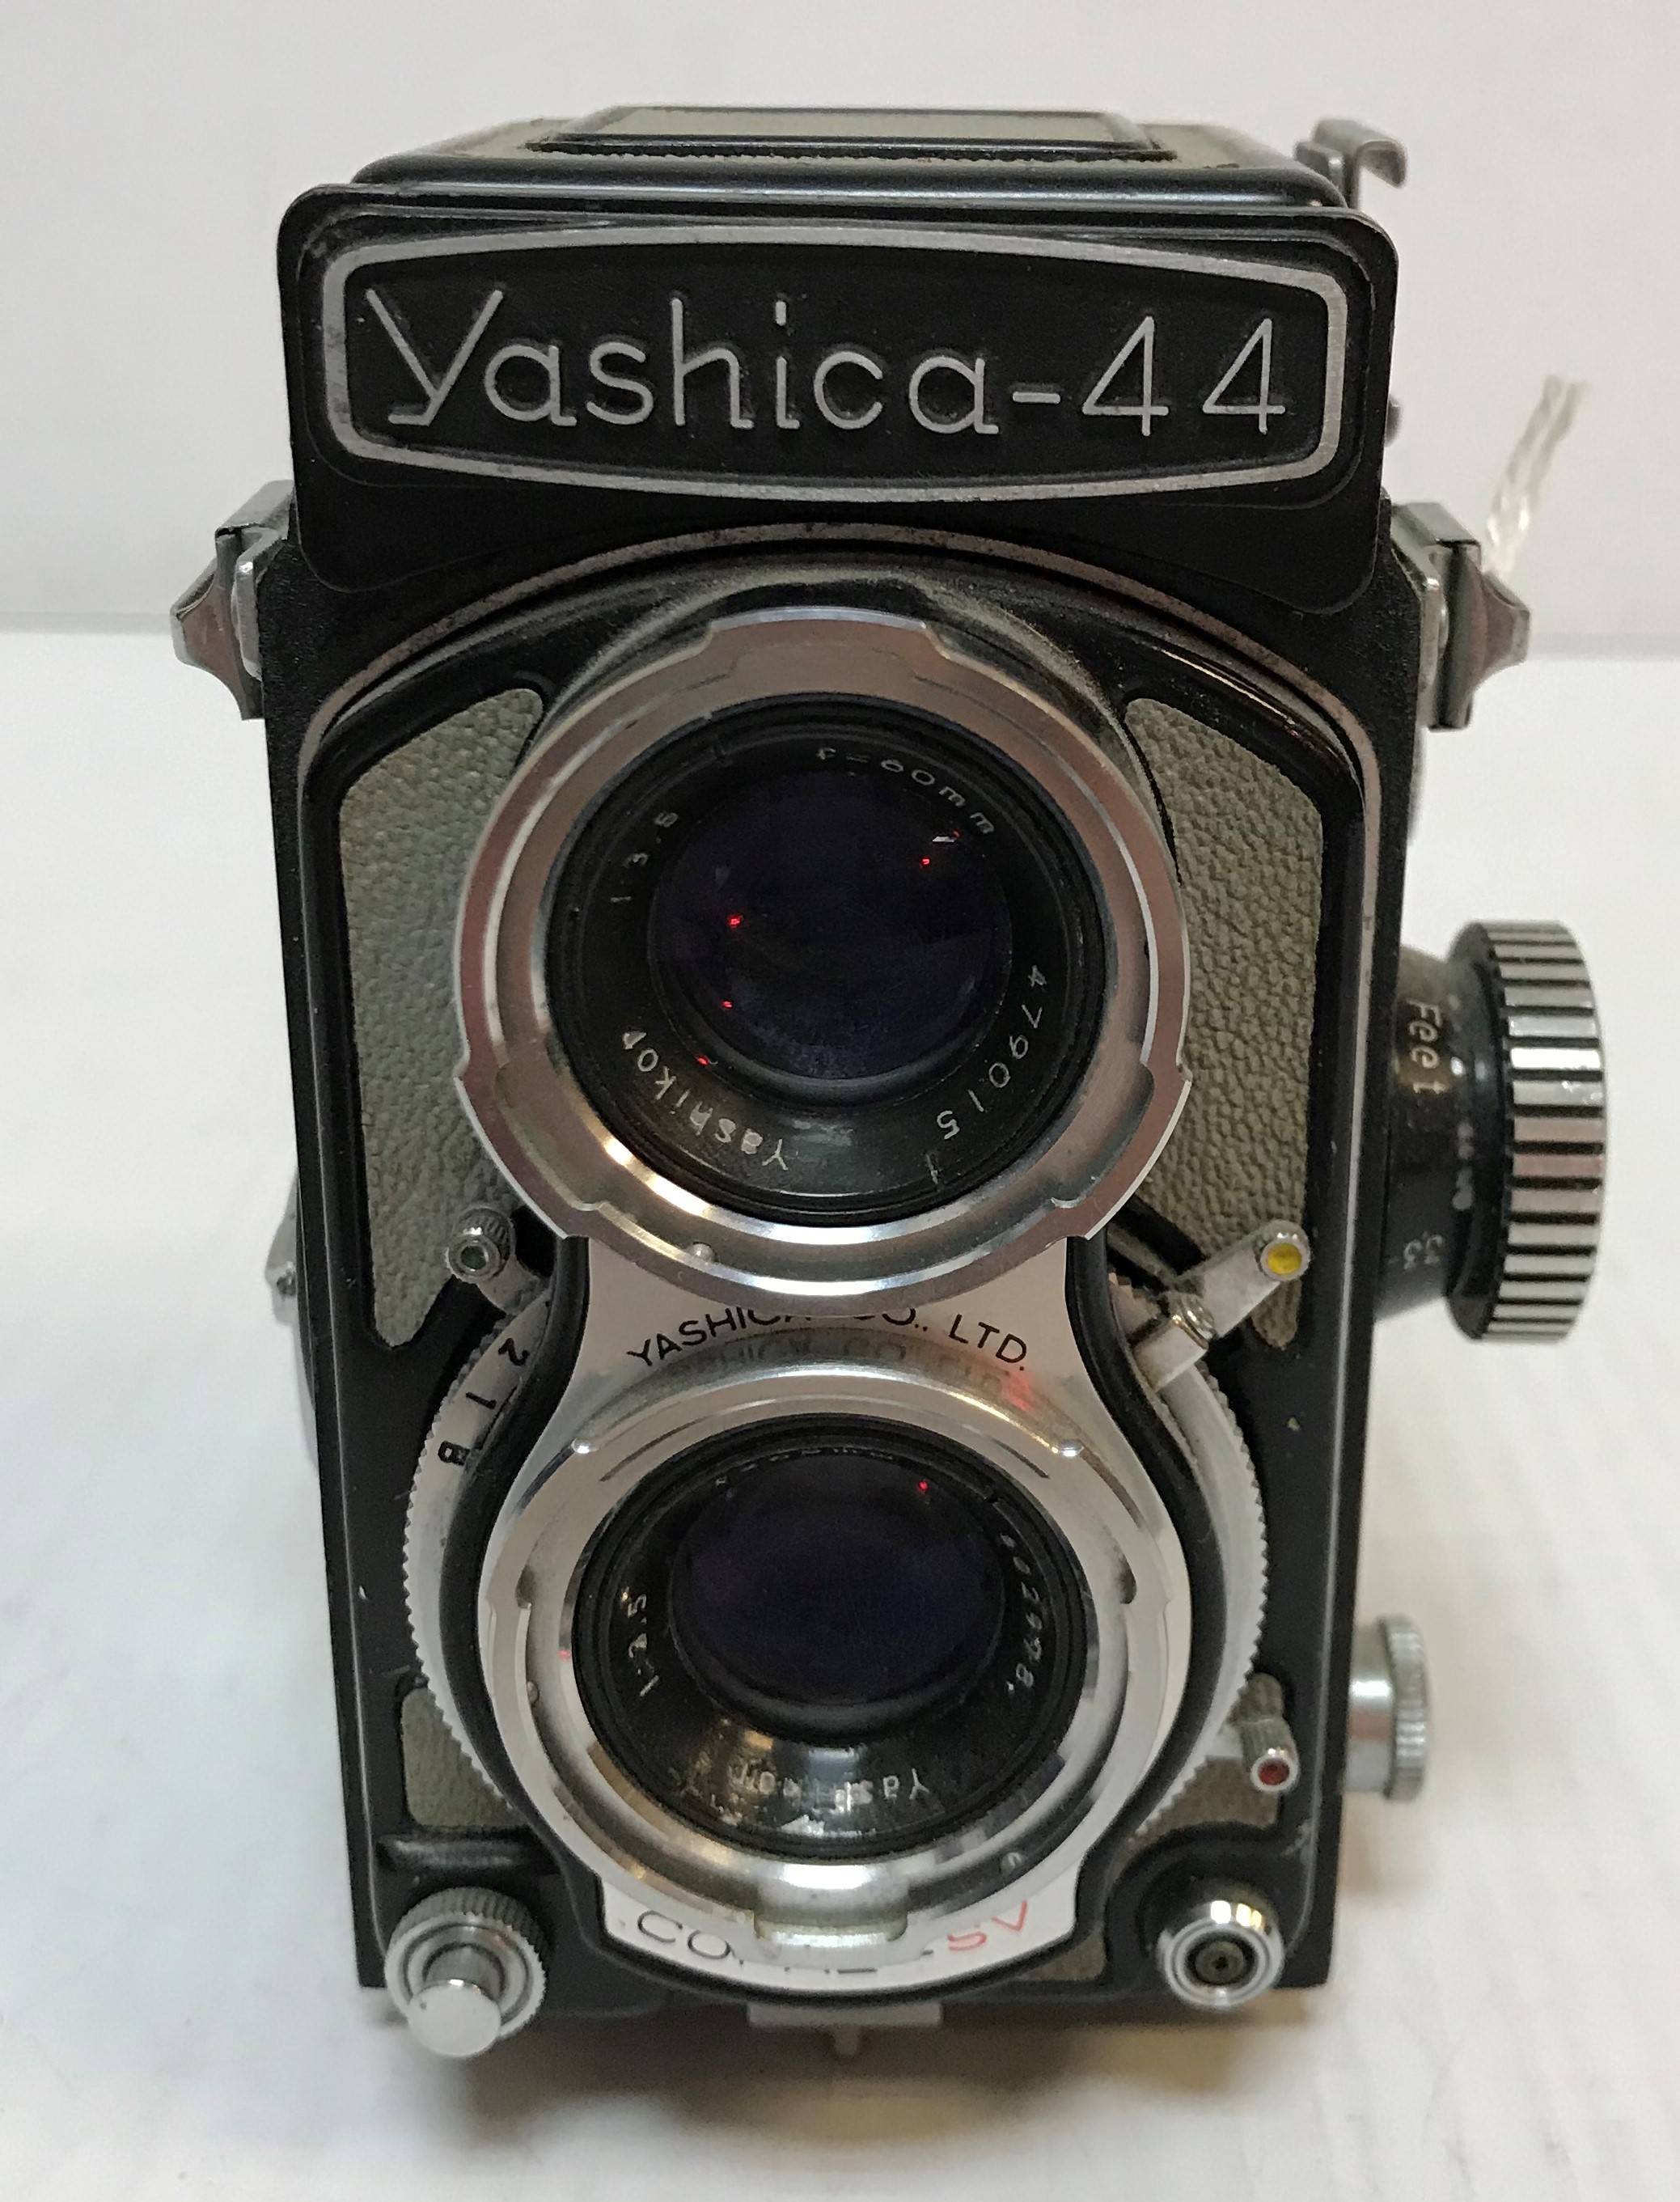 A Yashica 44 twin reflex camera, black and pale grey colourway (No. - Image 2 of 5